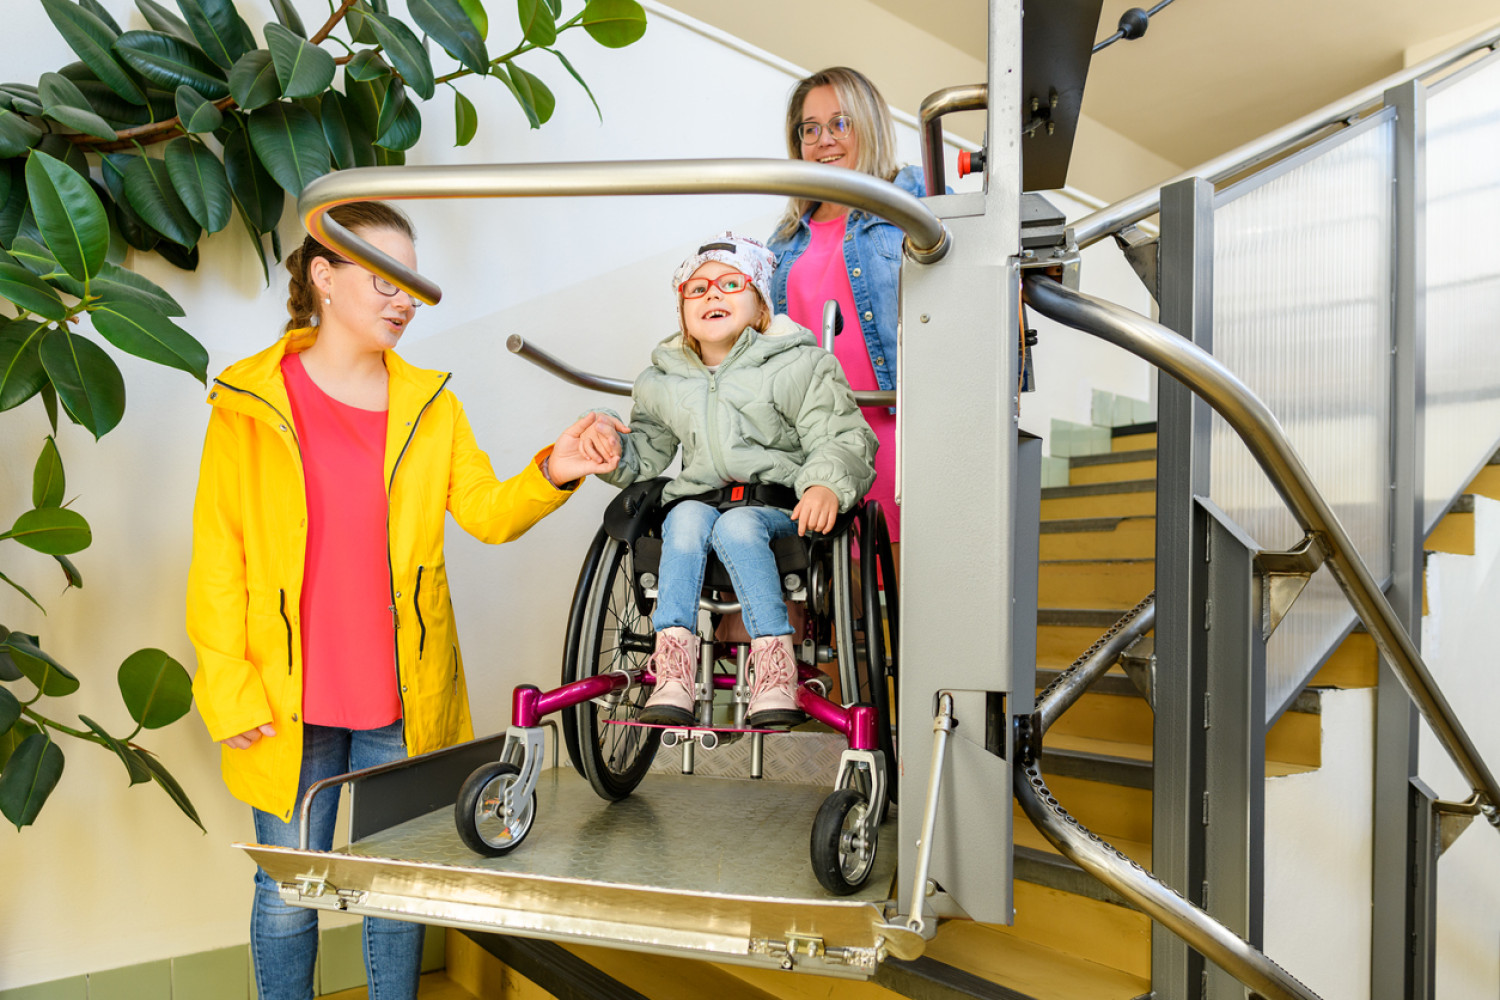 A student using a wheelchair accessing a school building with the aid of an inclined platform lift, exemplifying accessibility in education.